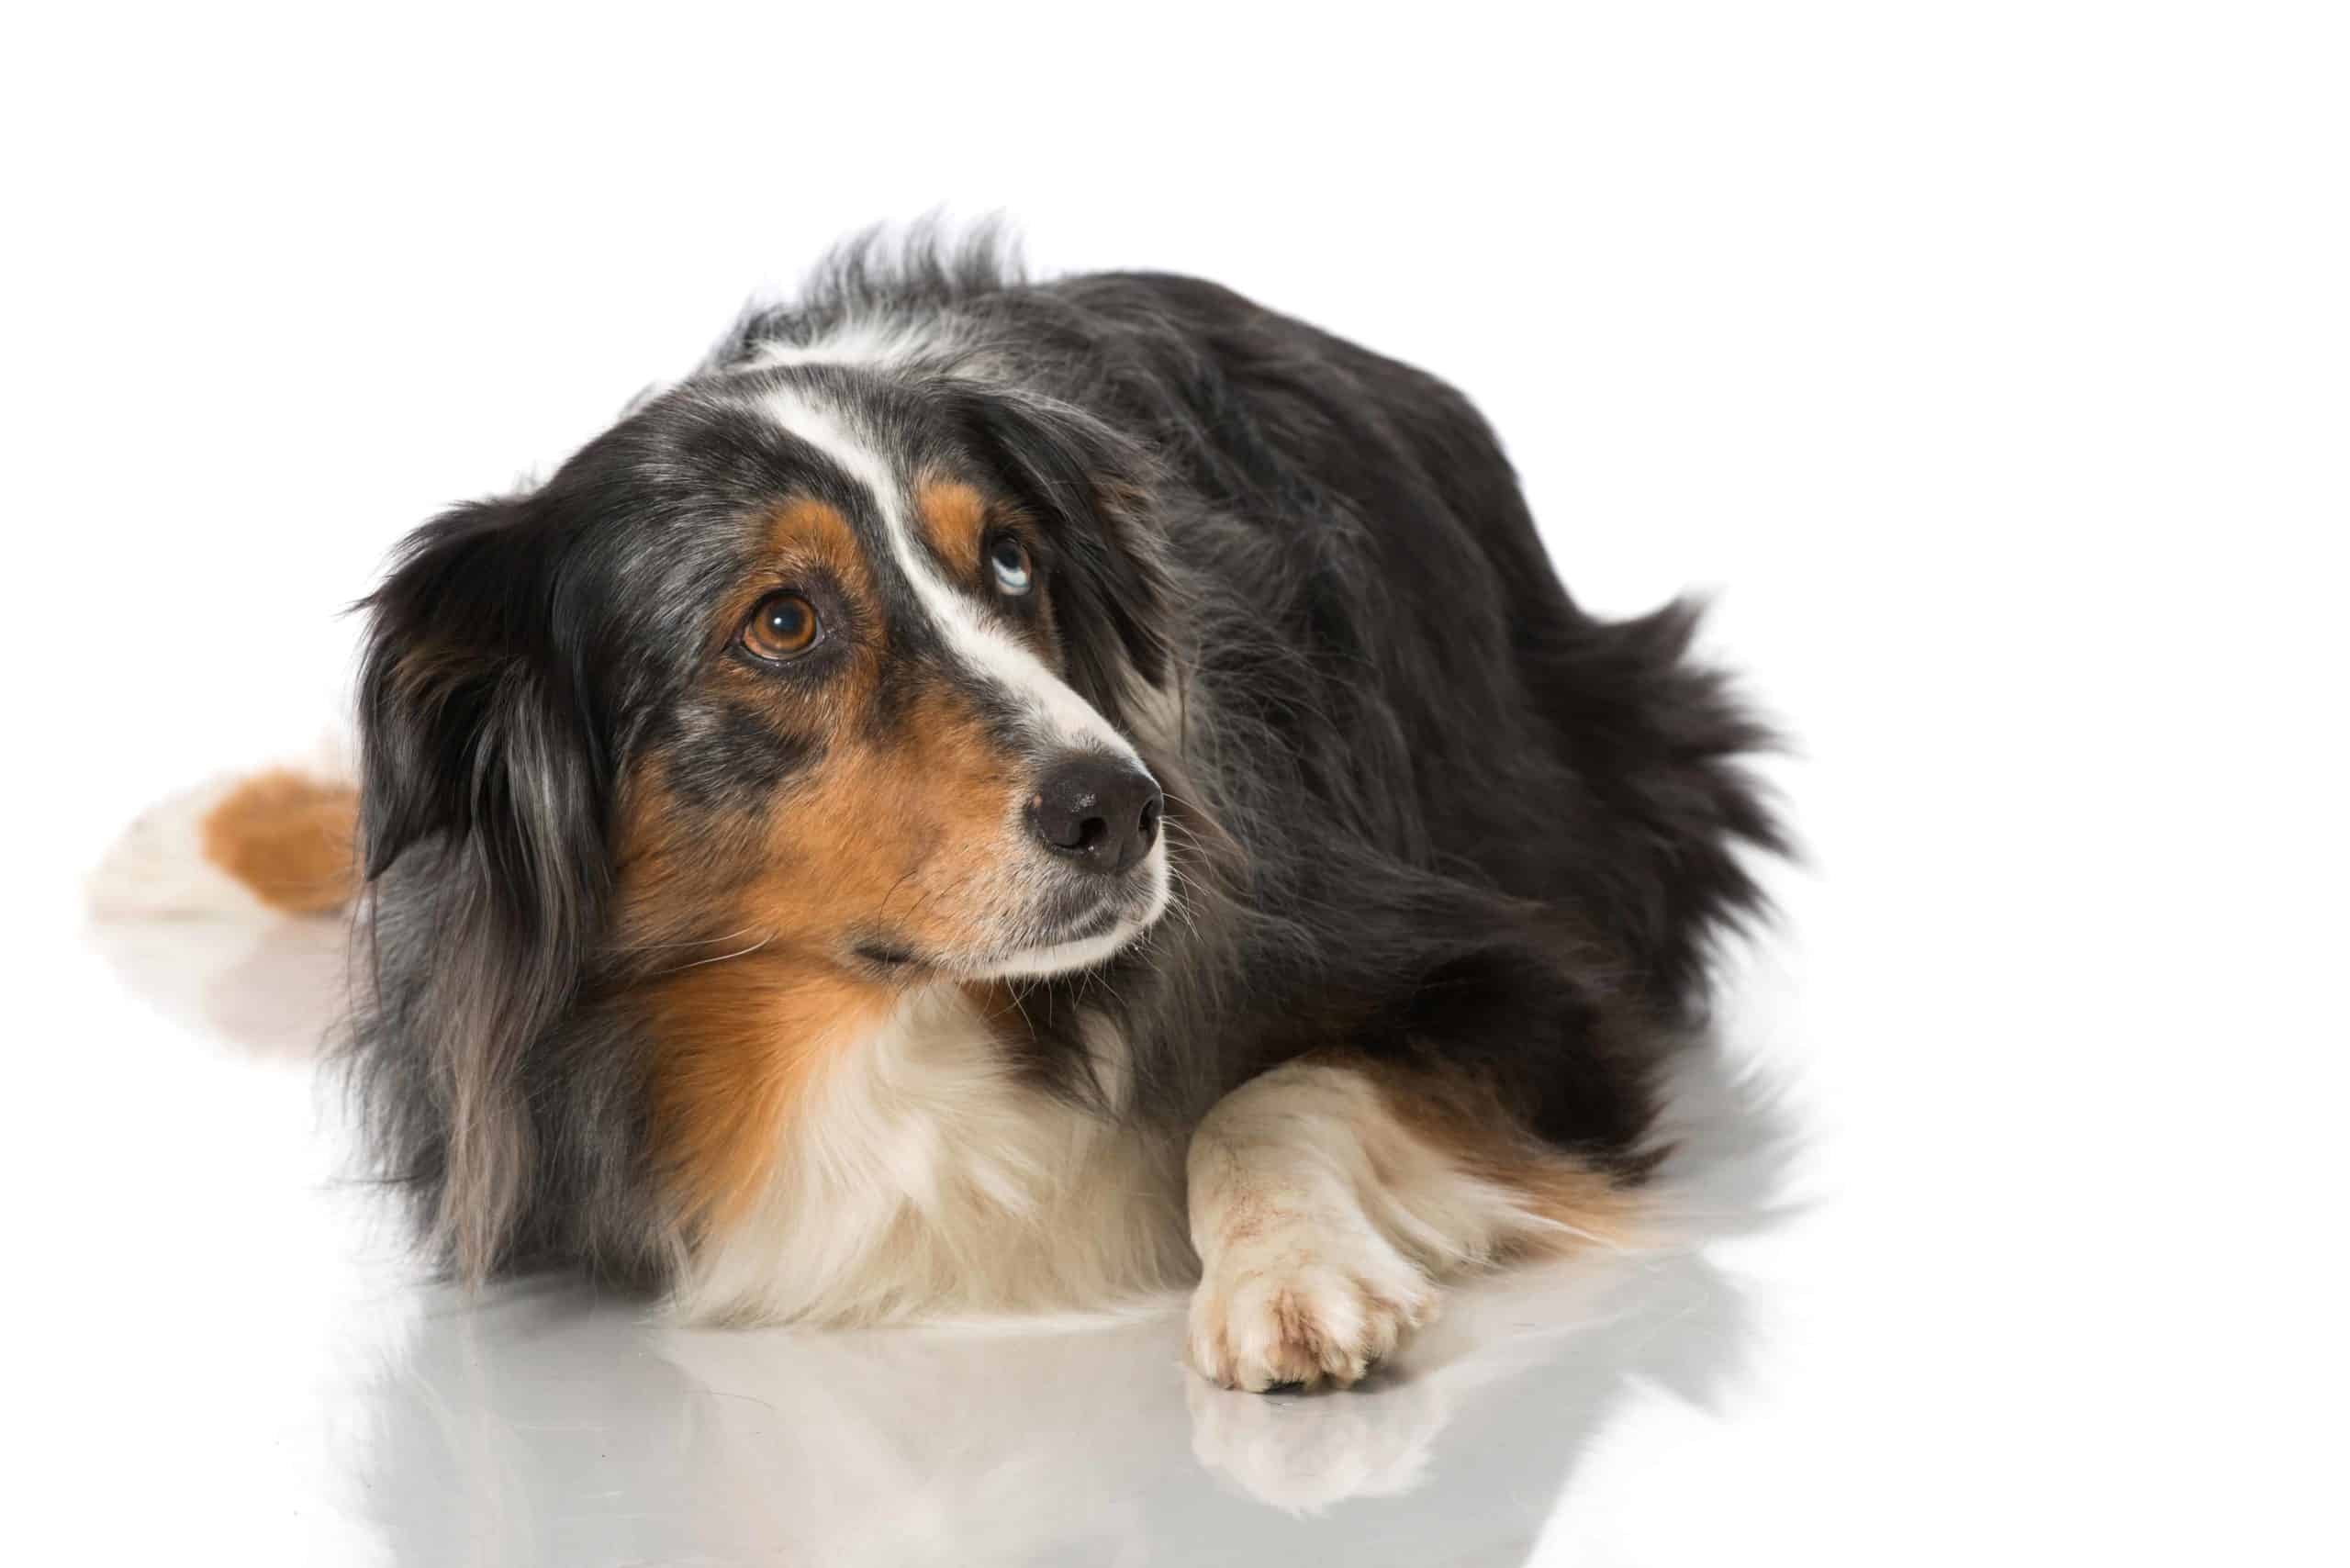 Nervous Australian Shepherd looks up. Reduce the risk of separation anxiety by preparing your dog to be home alone. Tire your dog out, create a safe space and use toys and treats.